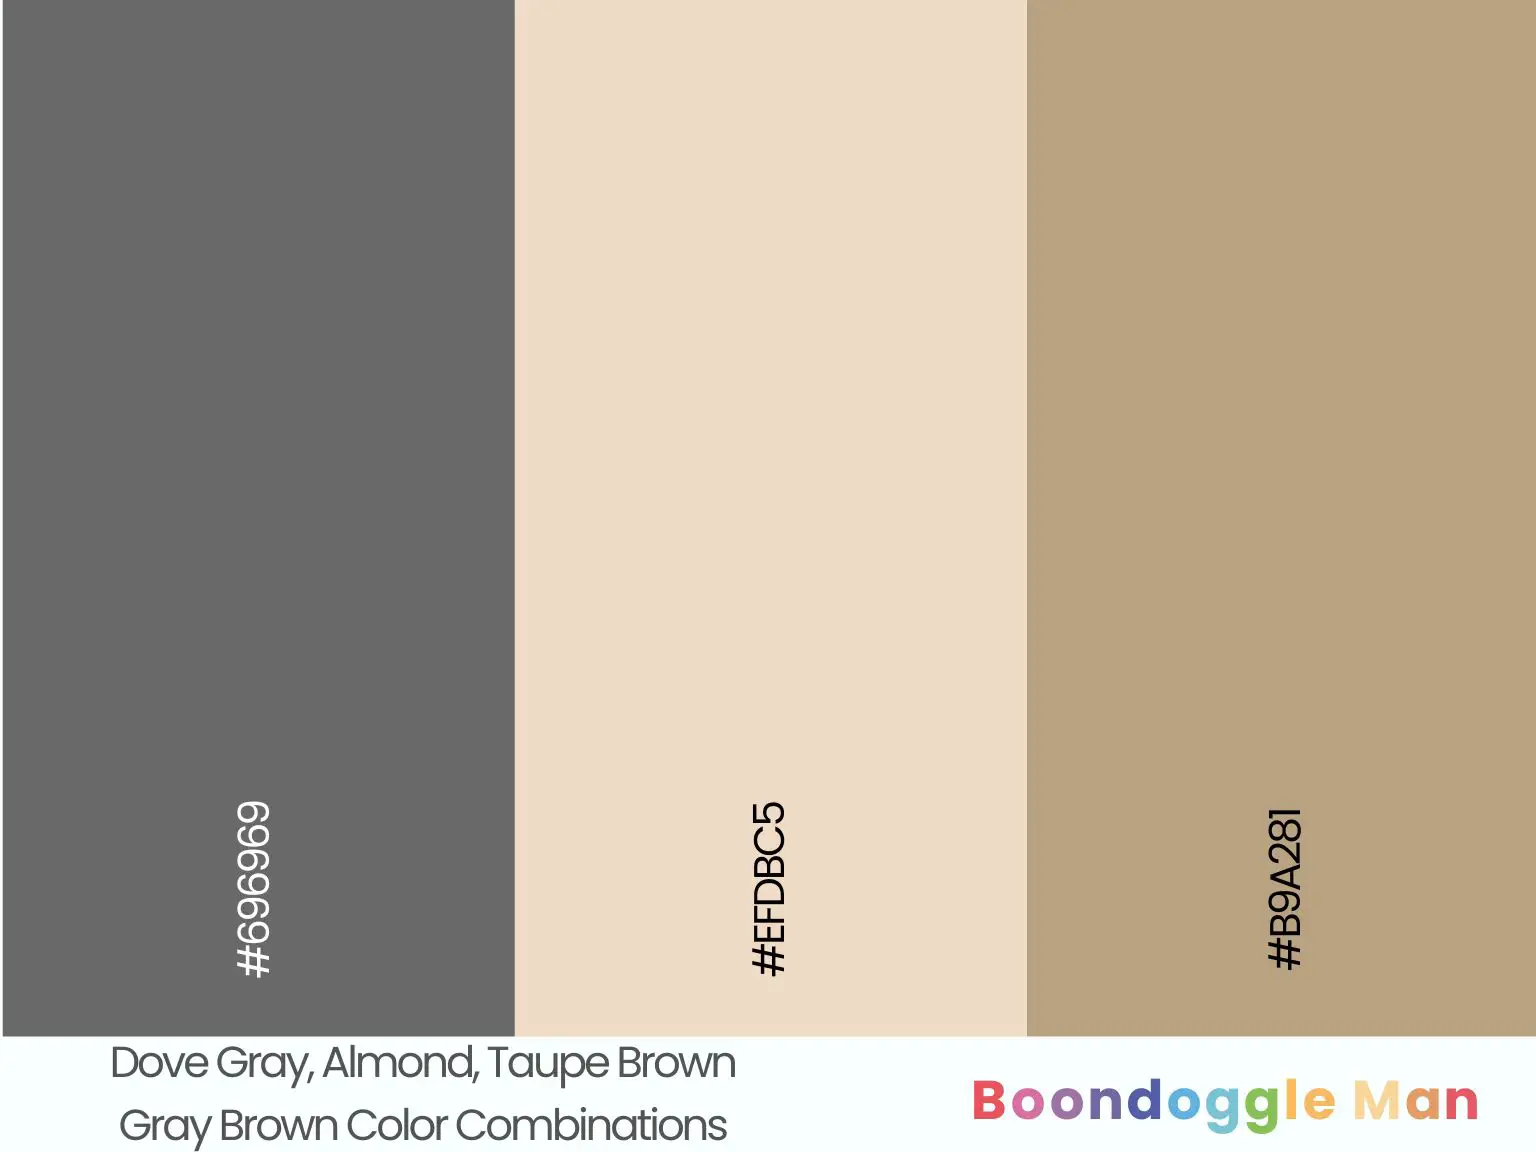 Dove Gray, Almond, Taupe Brown